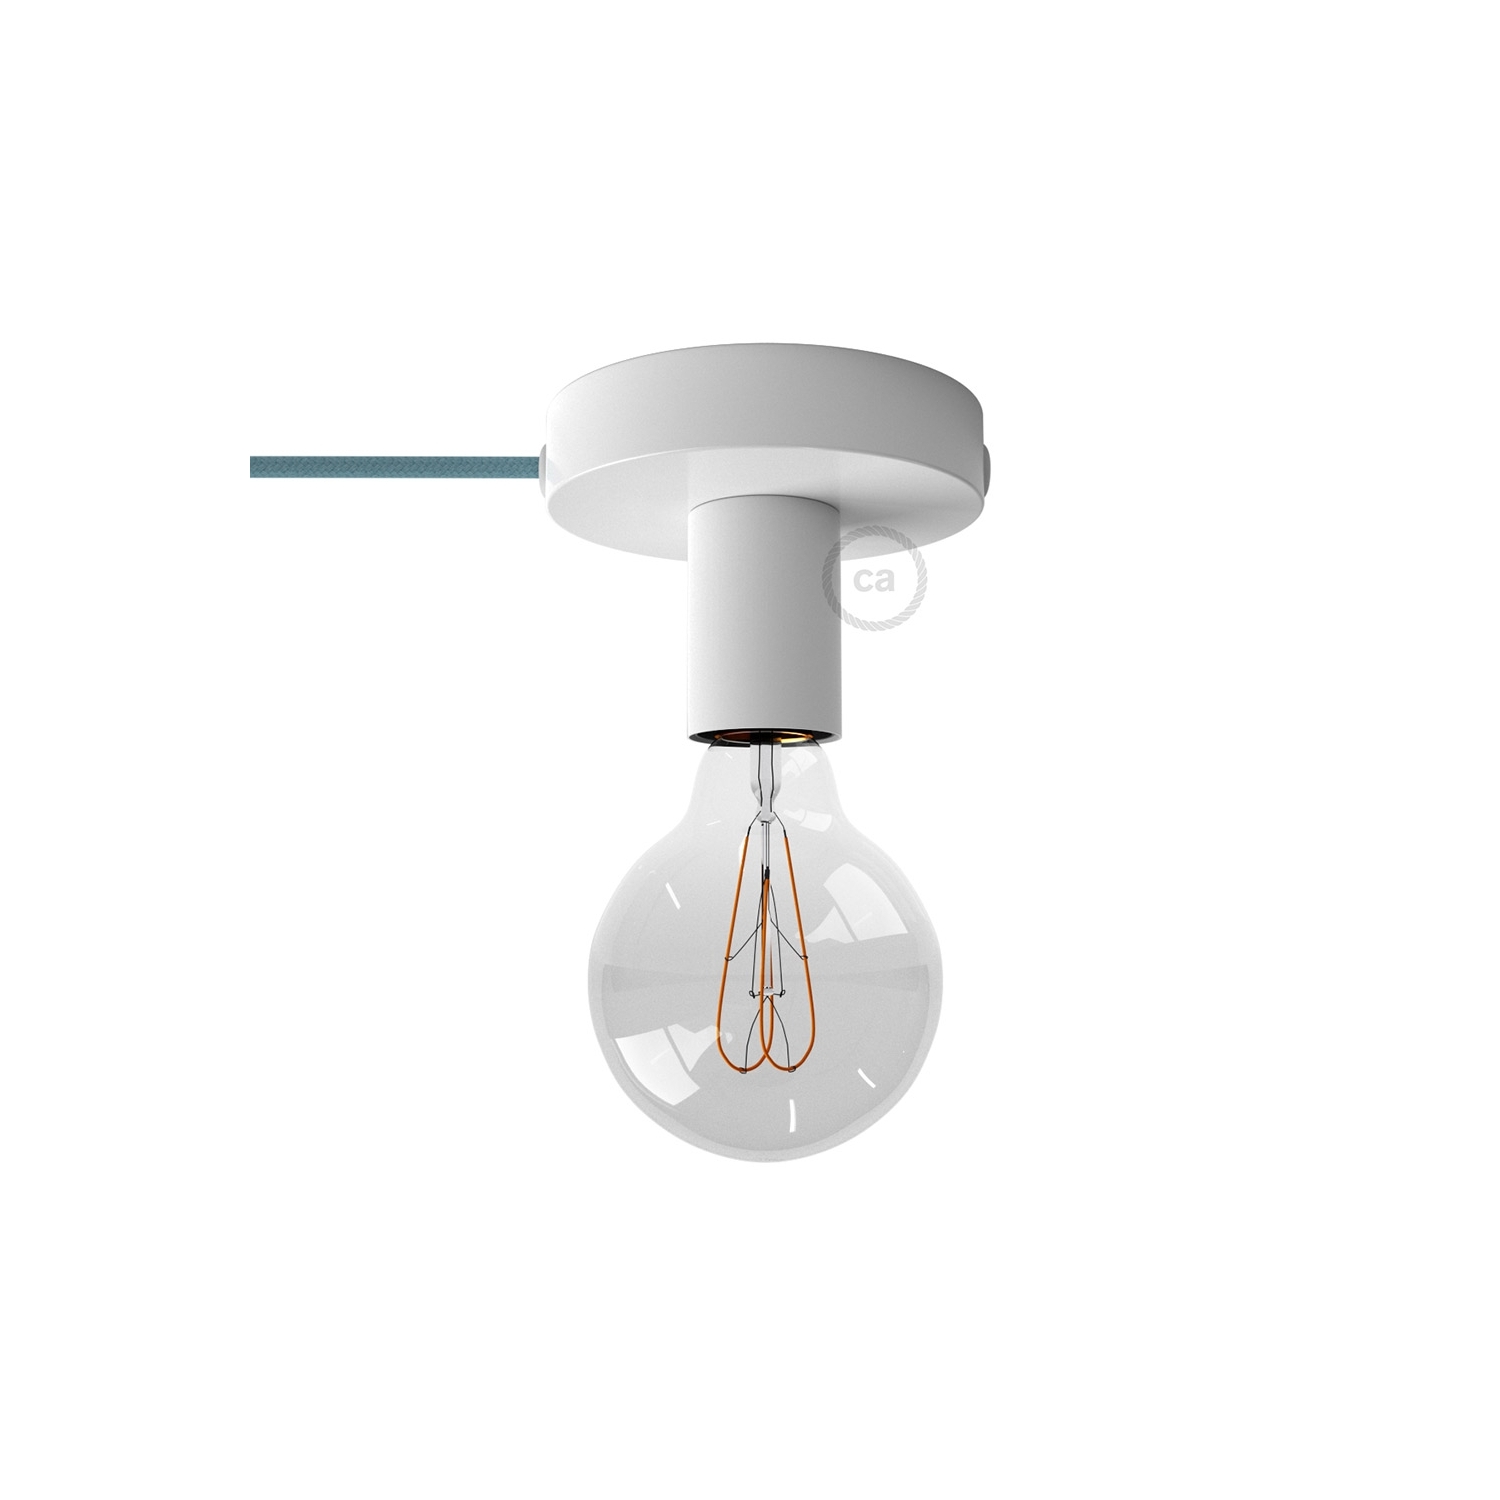 Spostaluce, the white metal light source with fabric cable and side holes